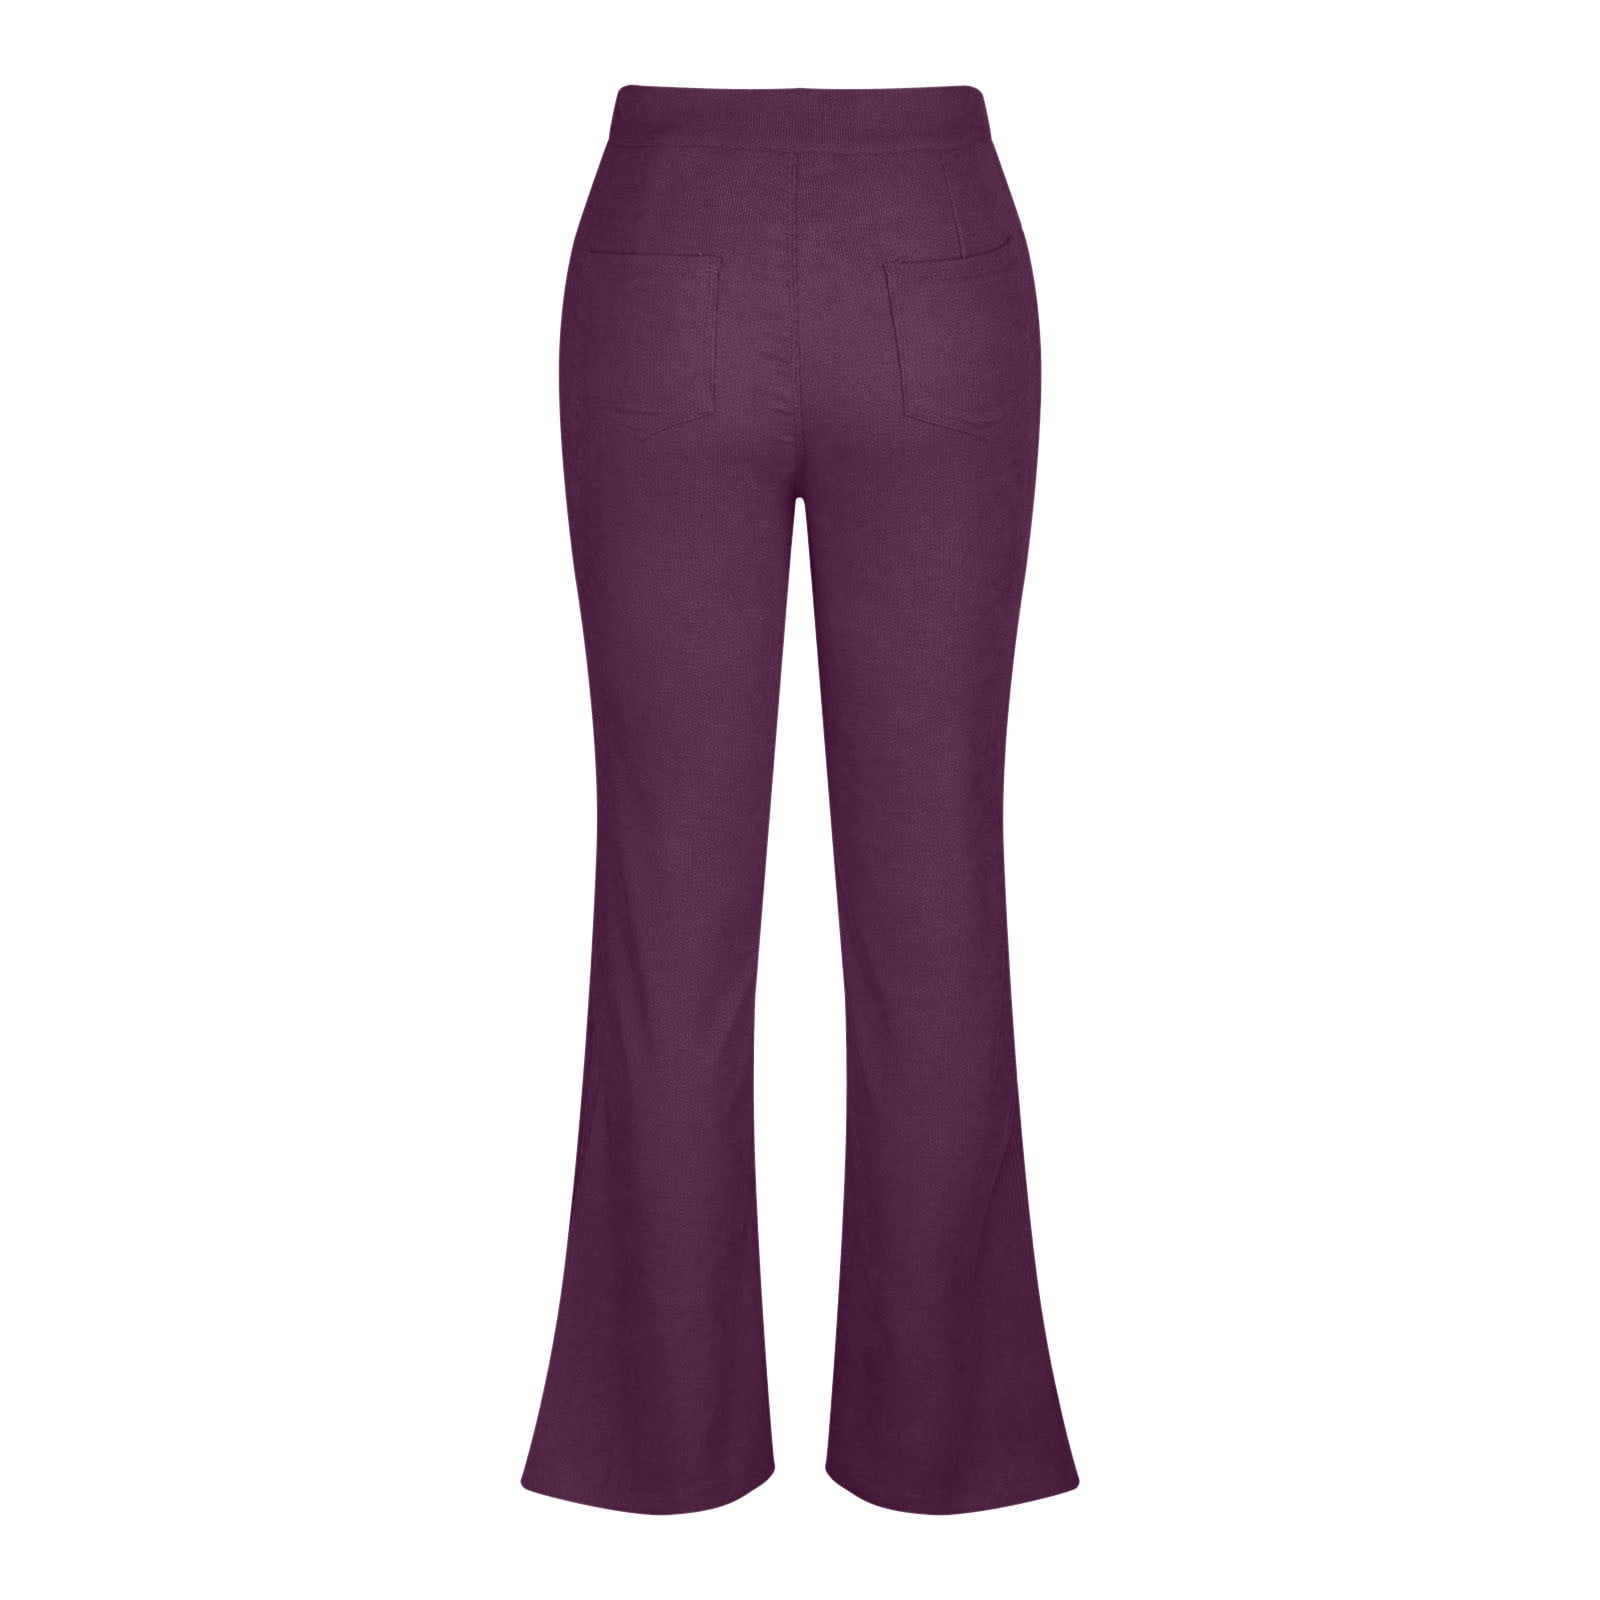 CONCITOR Men's Dress Pants Trousers Flat Front India | Ubuy